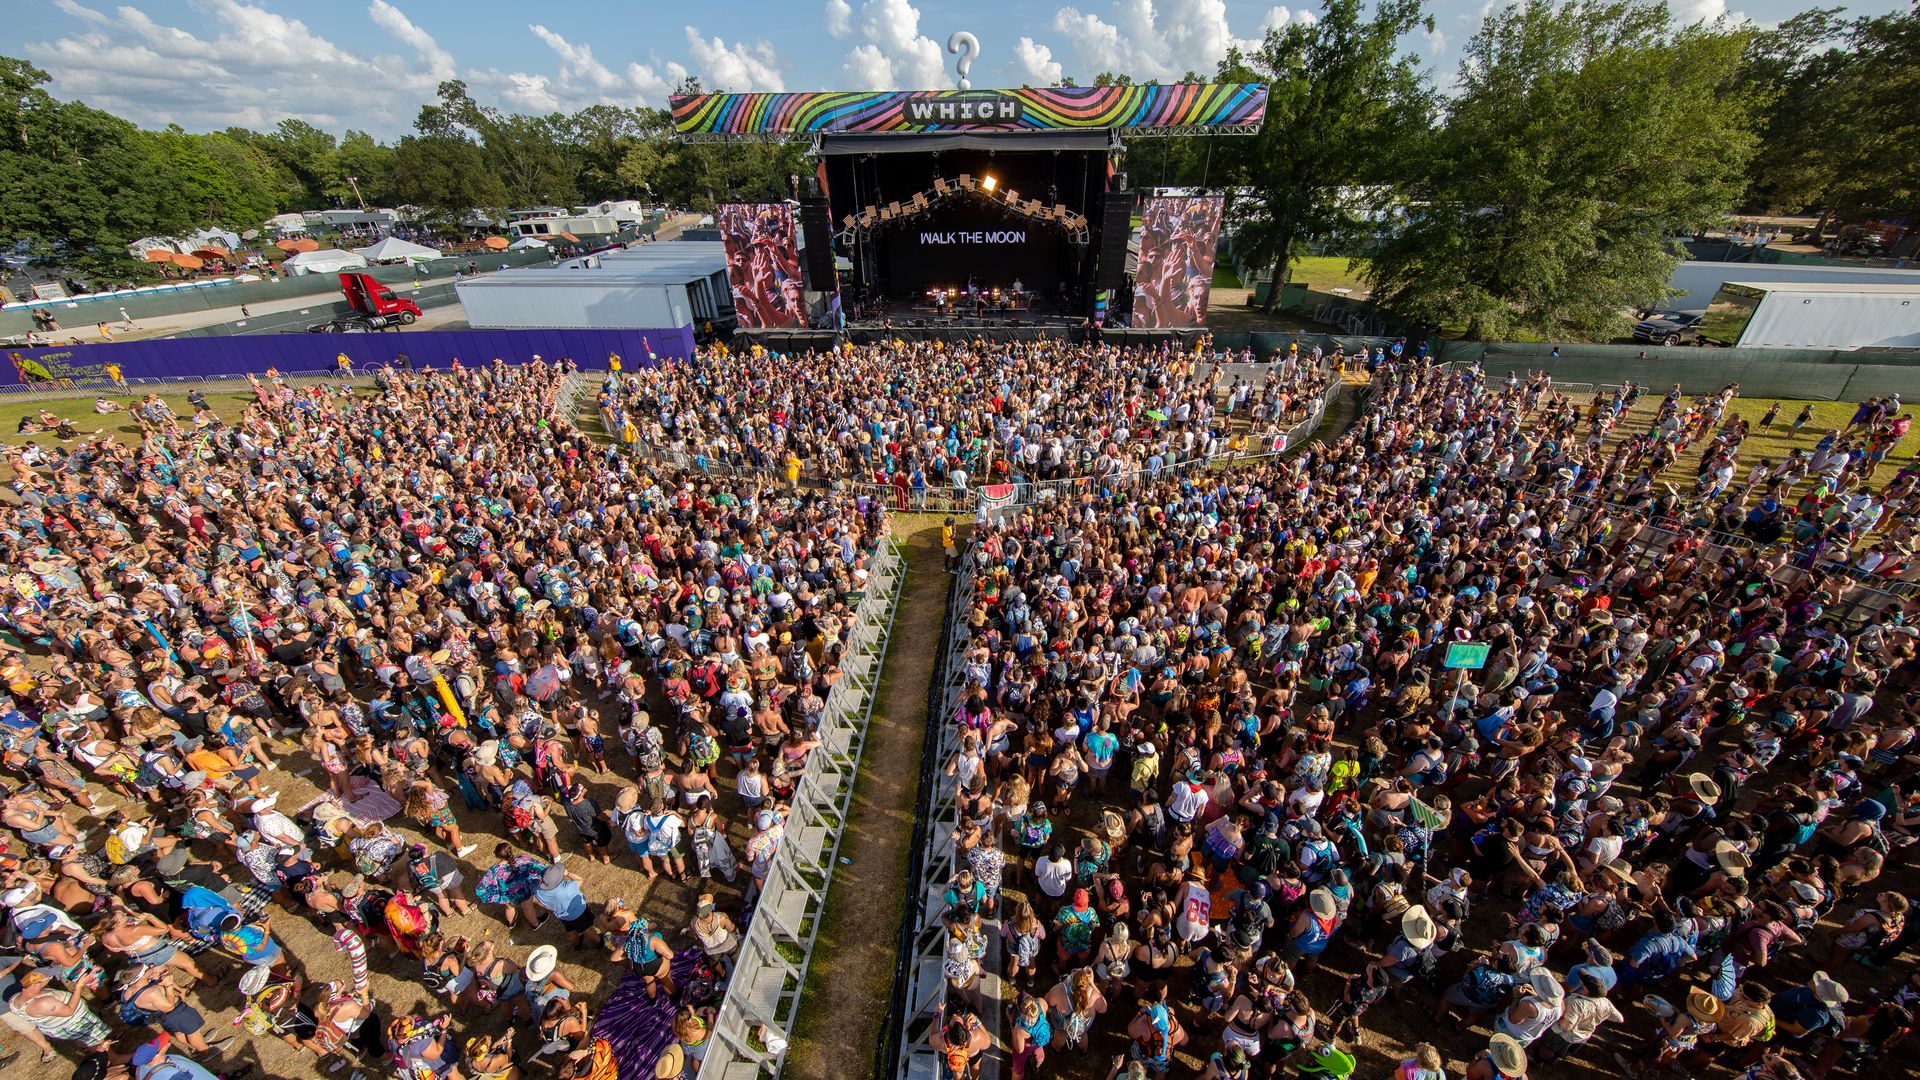 A large crowd gathers at the Bonnaroo Music and Arts Festival